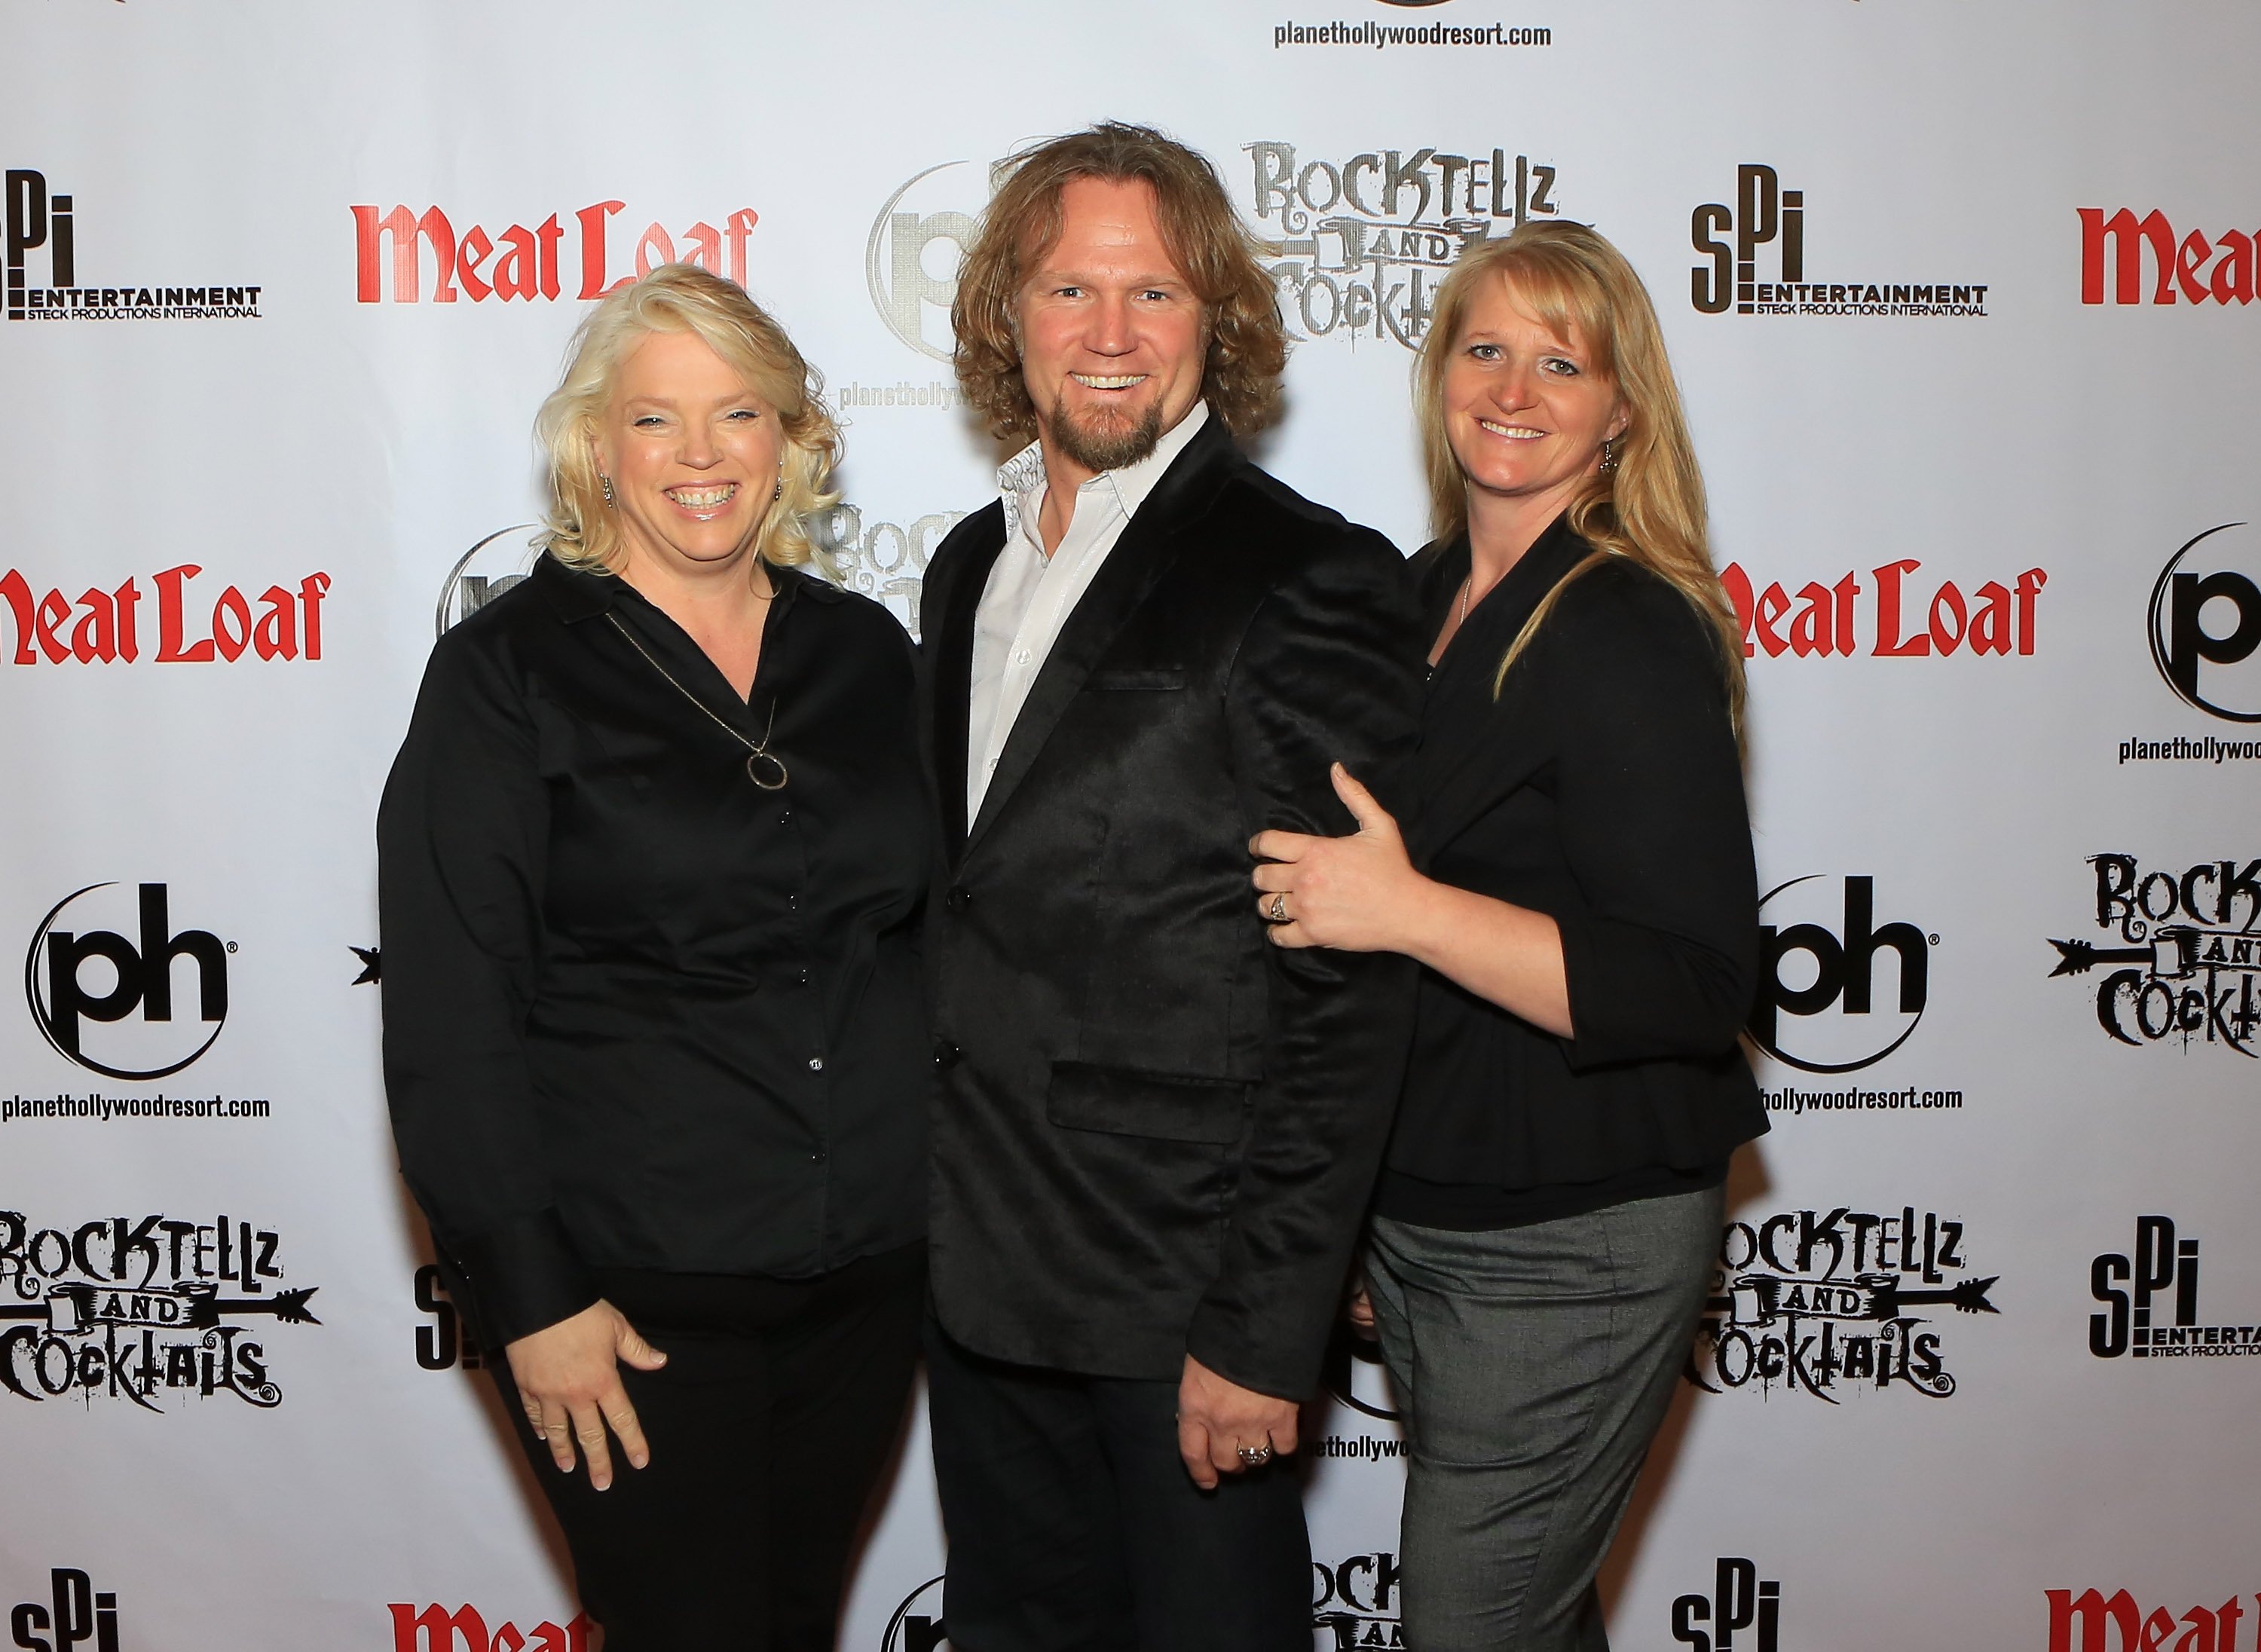 Janelle Brown, Kody Brown and Christine Brown pose for a photo during the 'Rocktellz & Cocktails presents Meat Loaf' event at Planet Hollywood Resort & Casino